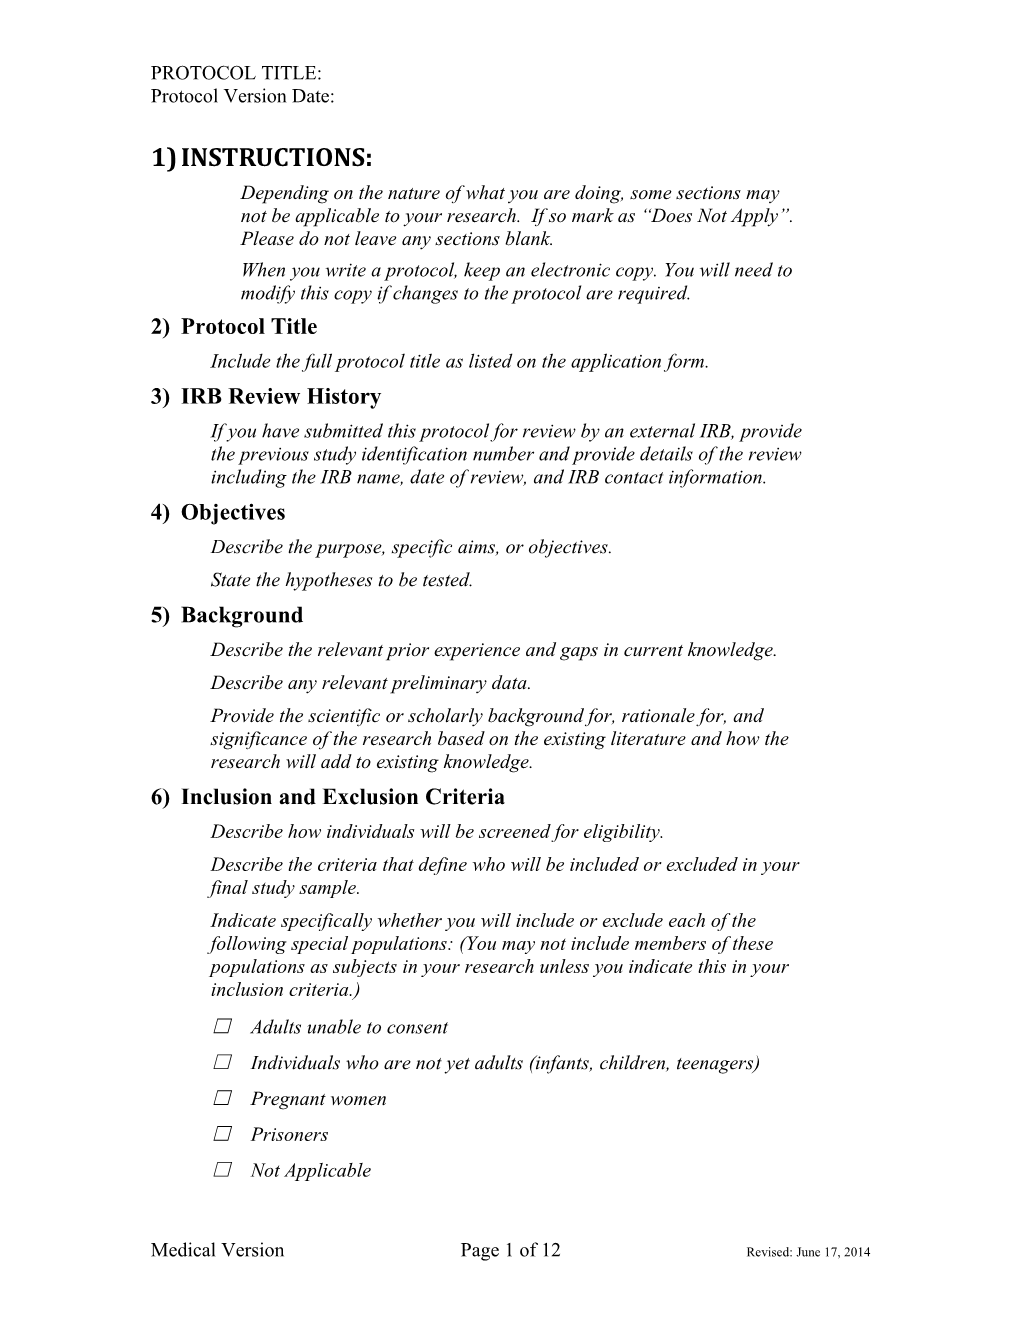 HRP-503 Medical Clinical Template Protocol